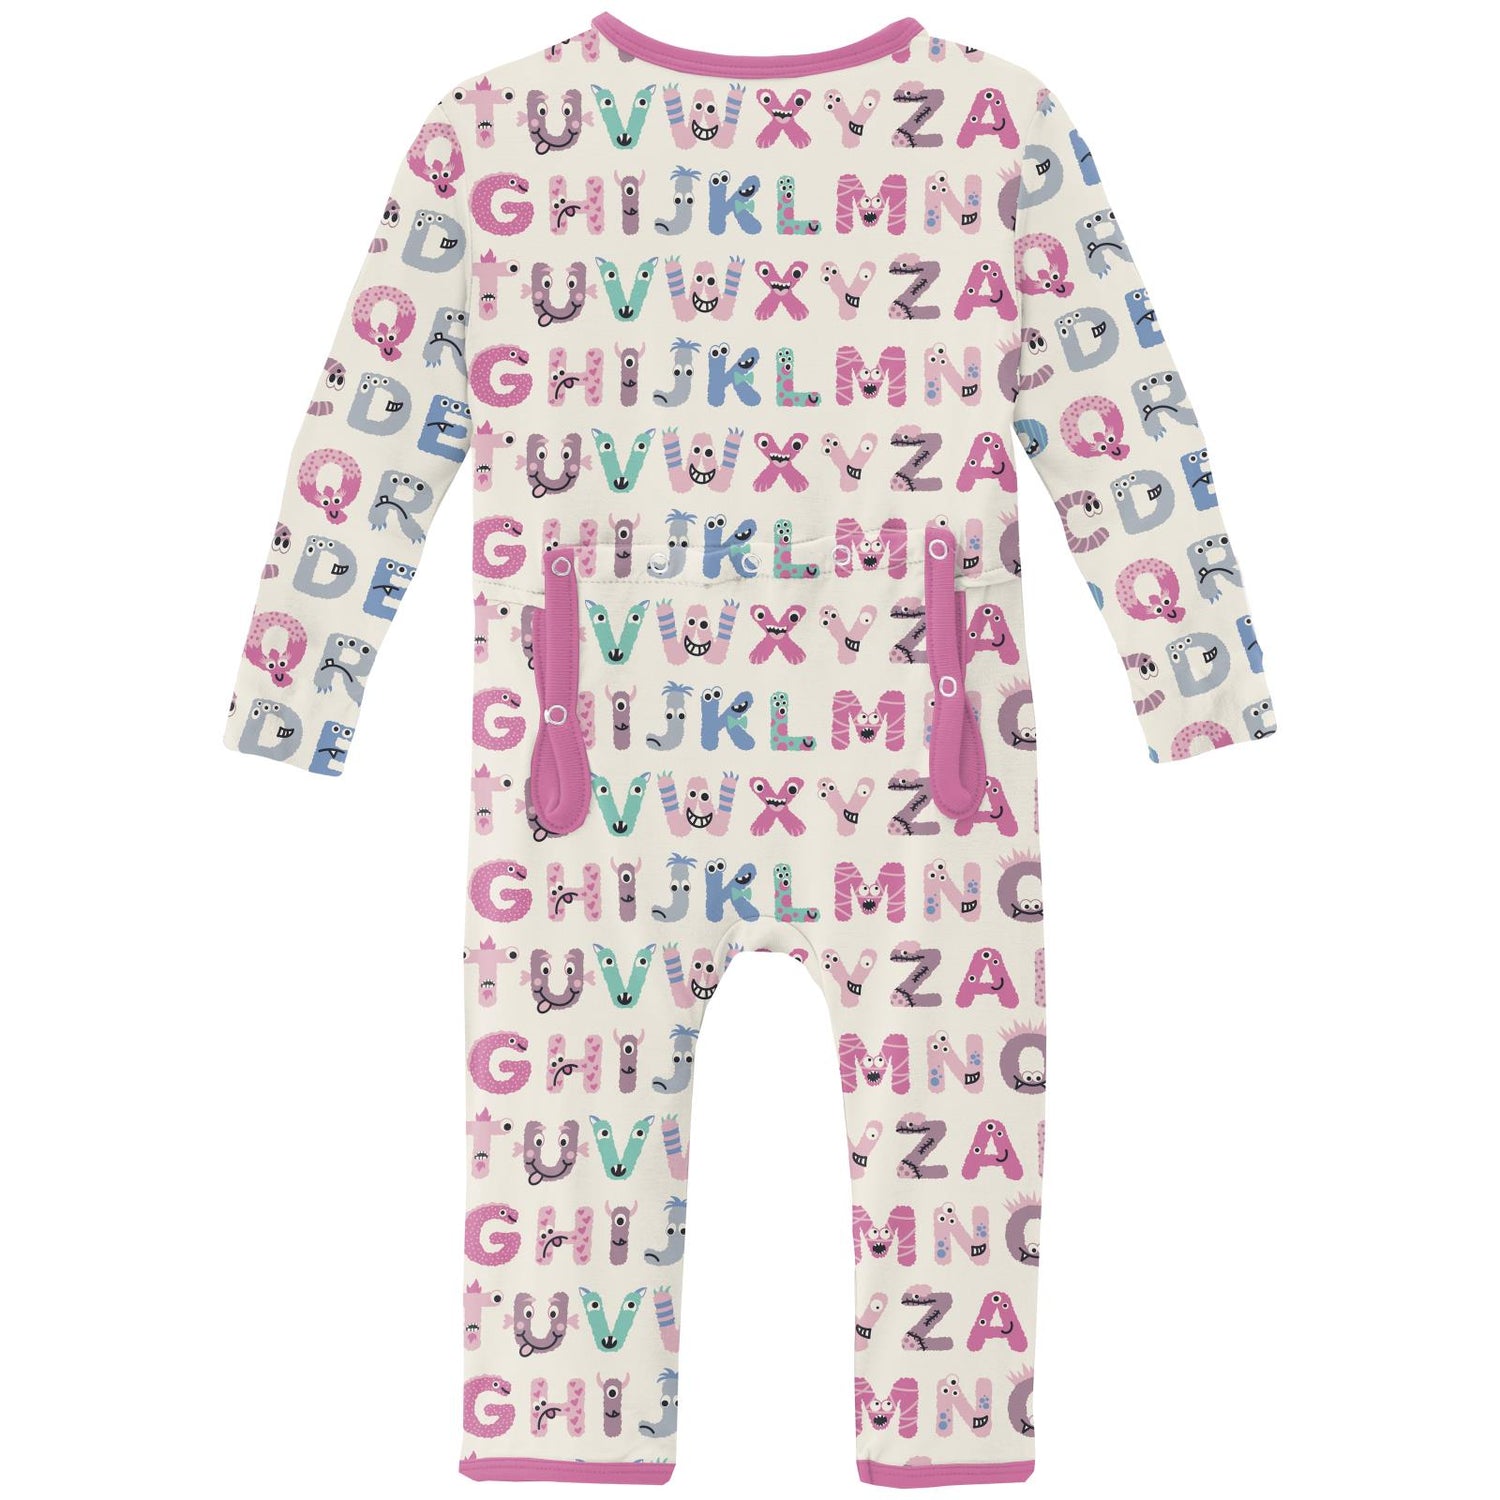 Print Coverall with 2 Way Zipper in Natural ABC Monsters